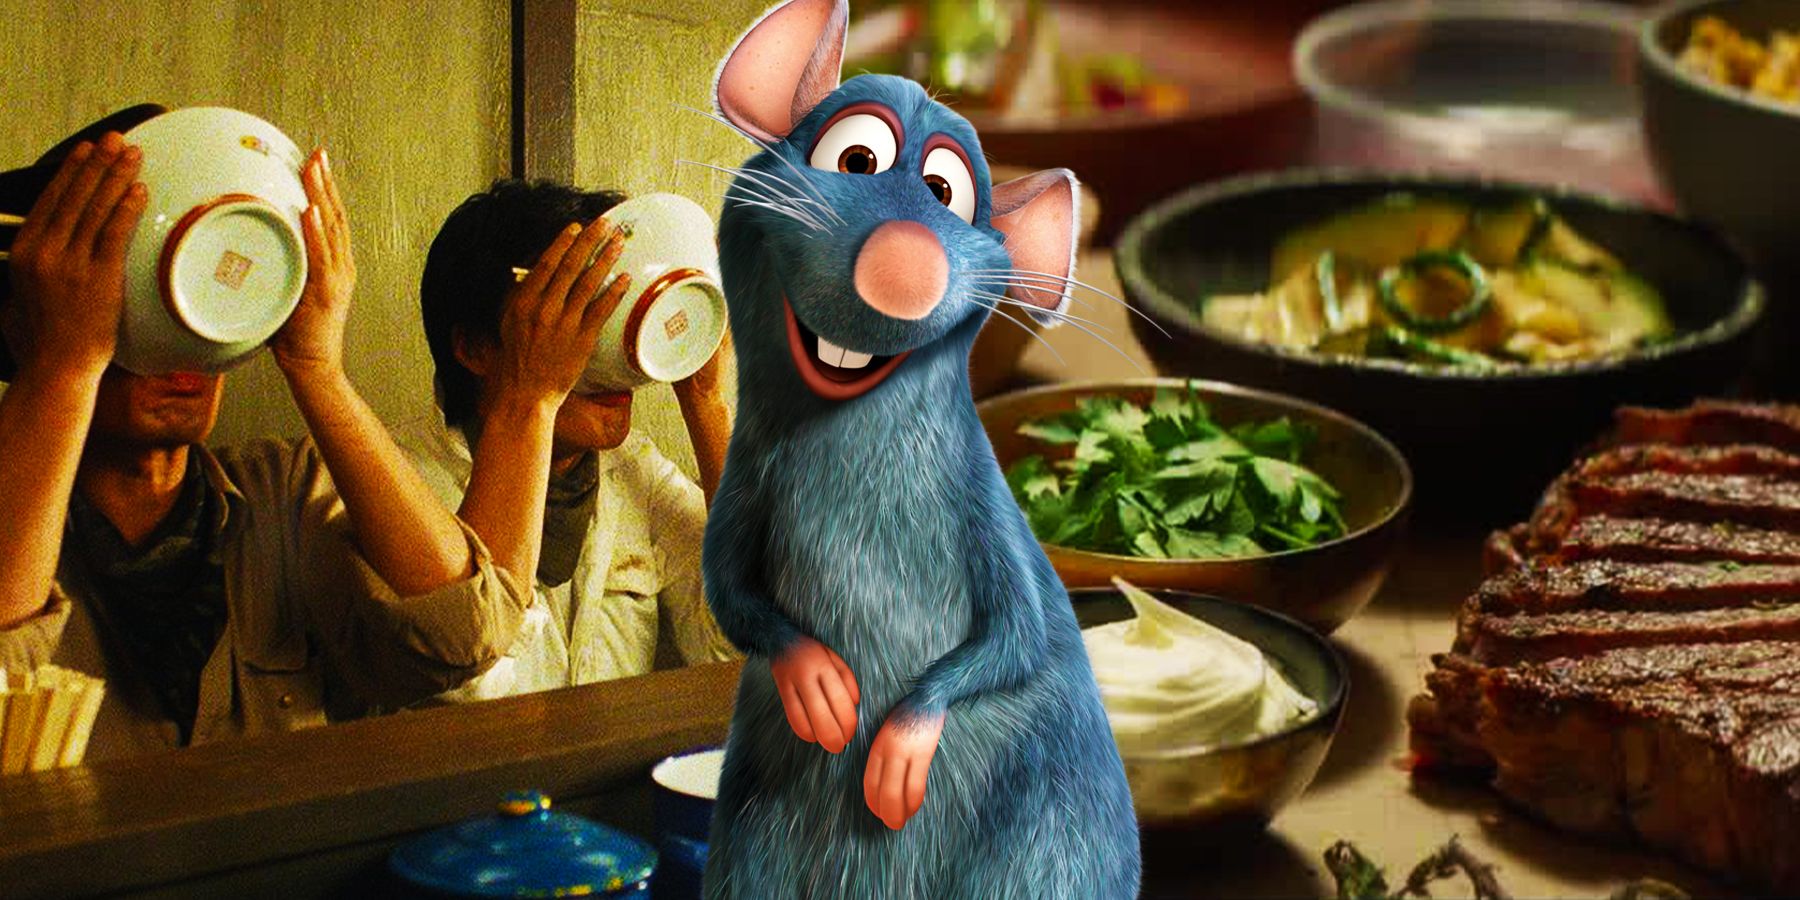 Remy of Ratatouille stands in the middle of the image. Behind on the left, men have bowls to their mouths as they sip ramen. On the right, a decadent spread of spices, herbs and meat sit on a table. 